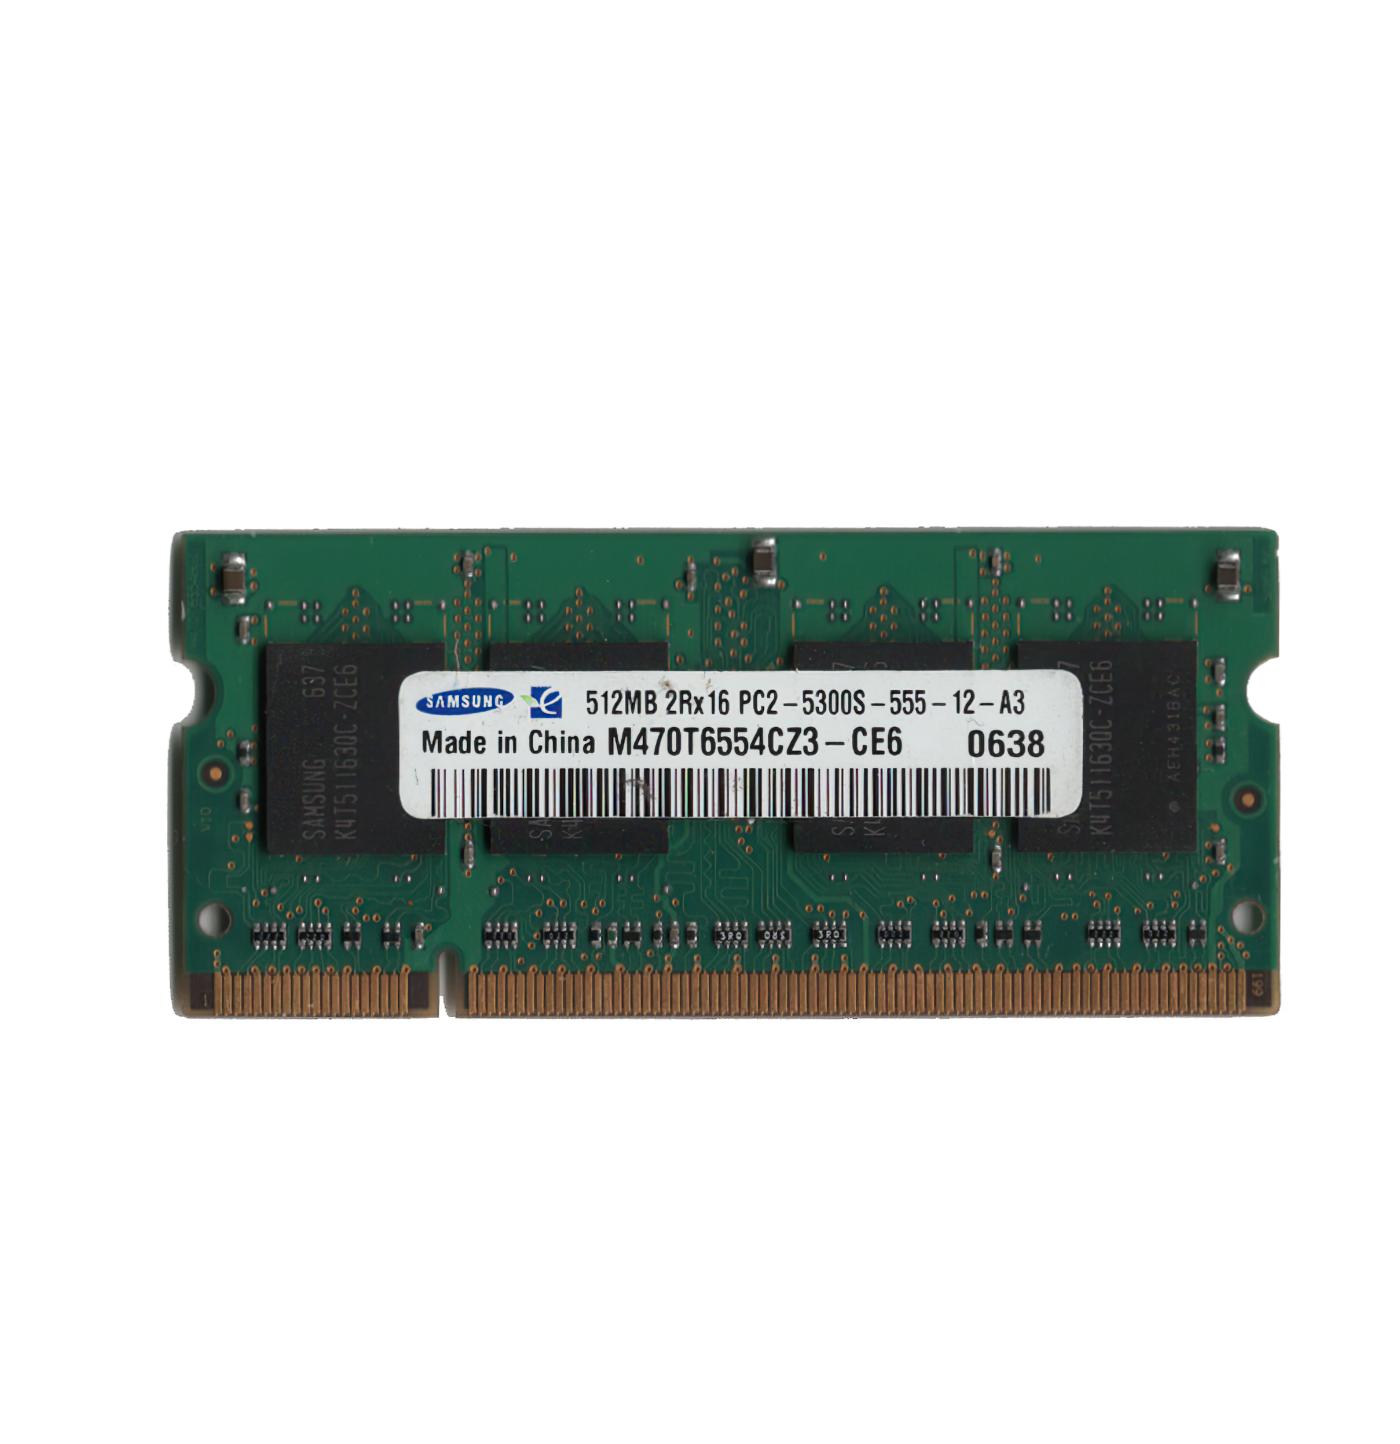 Preowned SAMSUNG 512MB 2RX16 PC2-5300S-555-12-A3 Memory Module - Untested